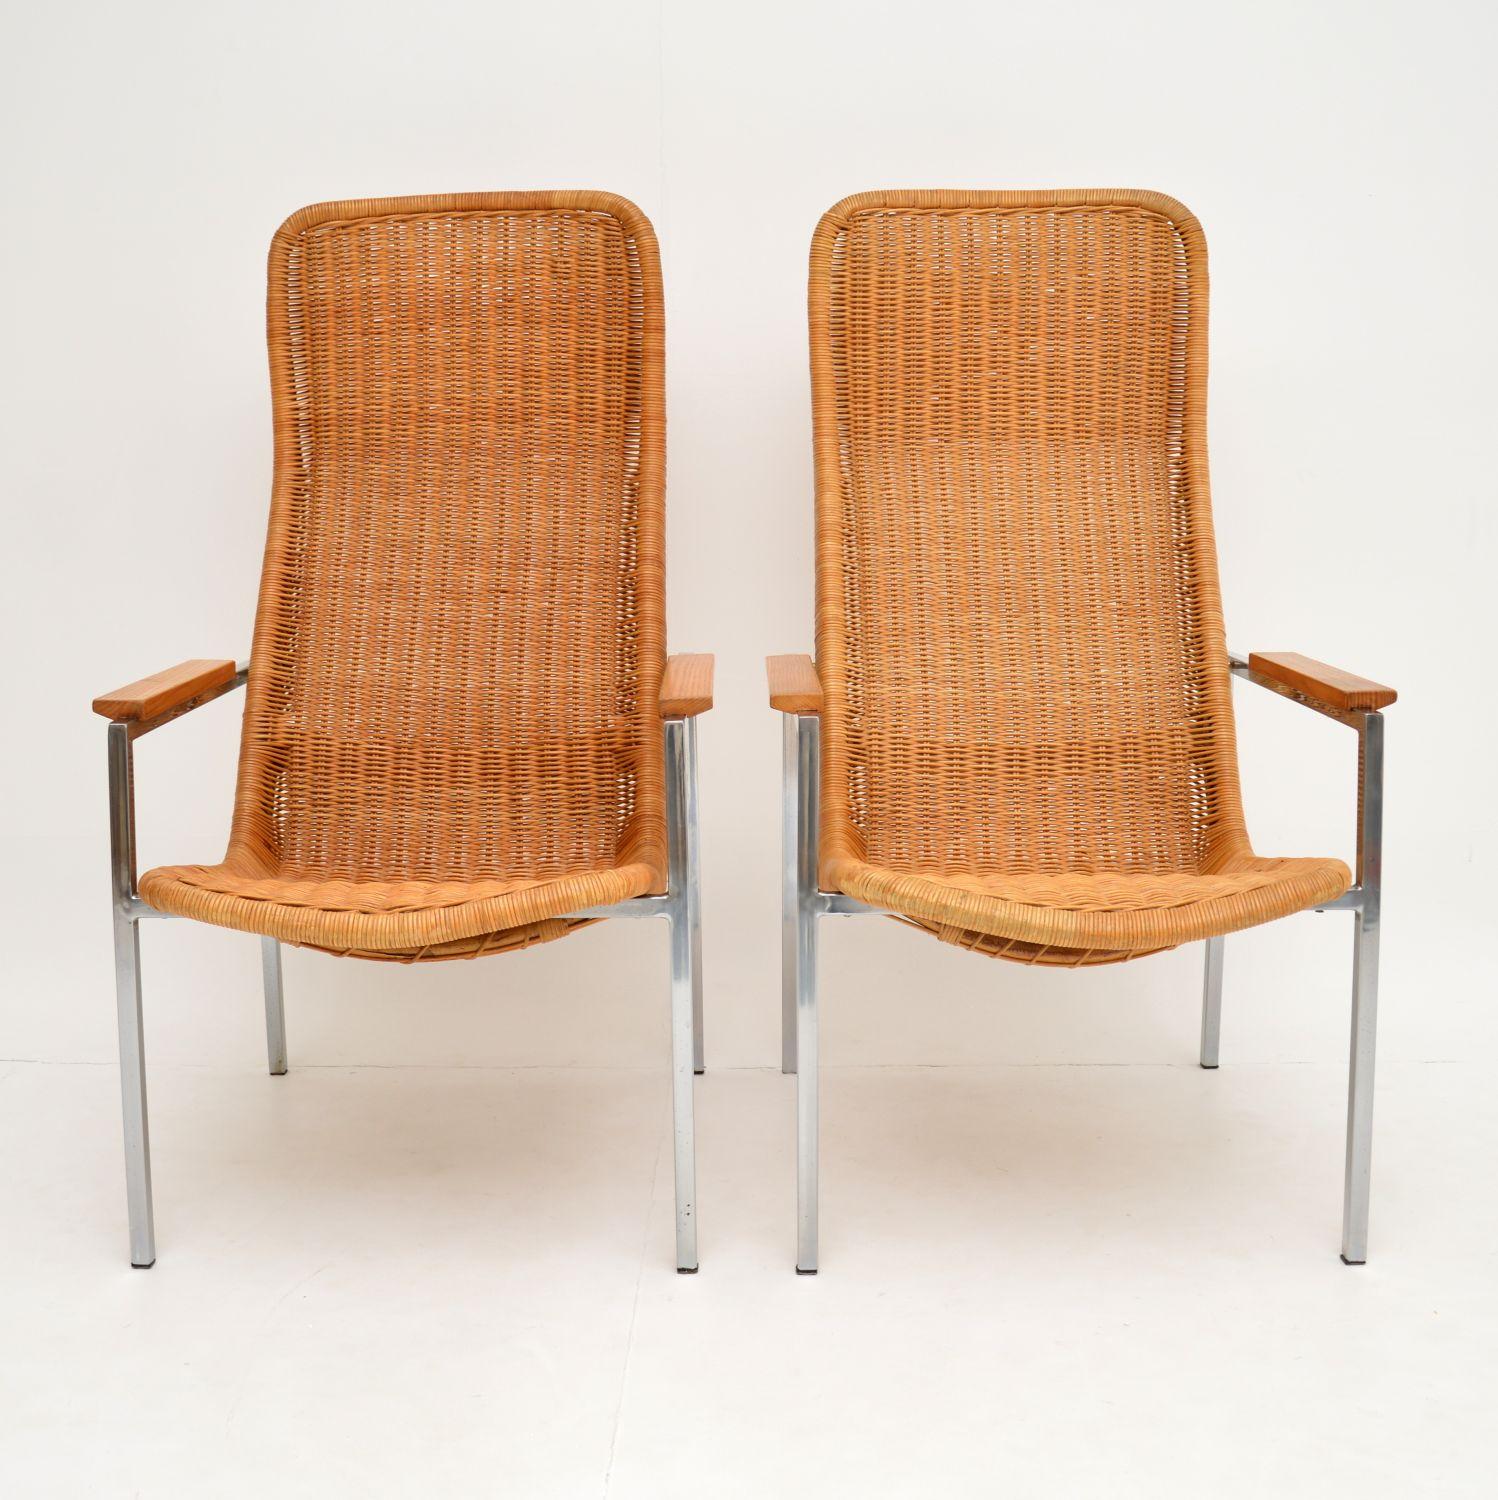 A stunning pair of high back armchairs, made in Holland in the 1960’s. These were designed by Dirk Van Sliedrecht, and made by Gebroeders Jonkers.

They are of super quality, and are extremely comfortable. They would be great with sheepskin throws